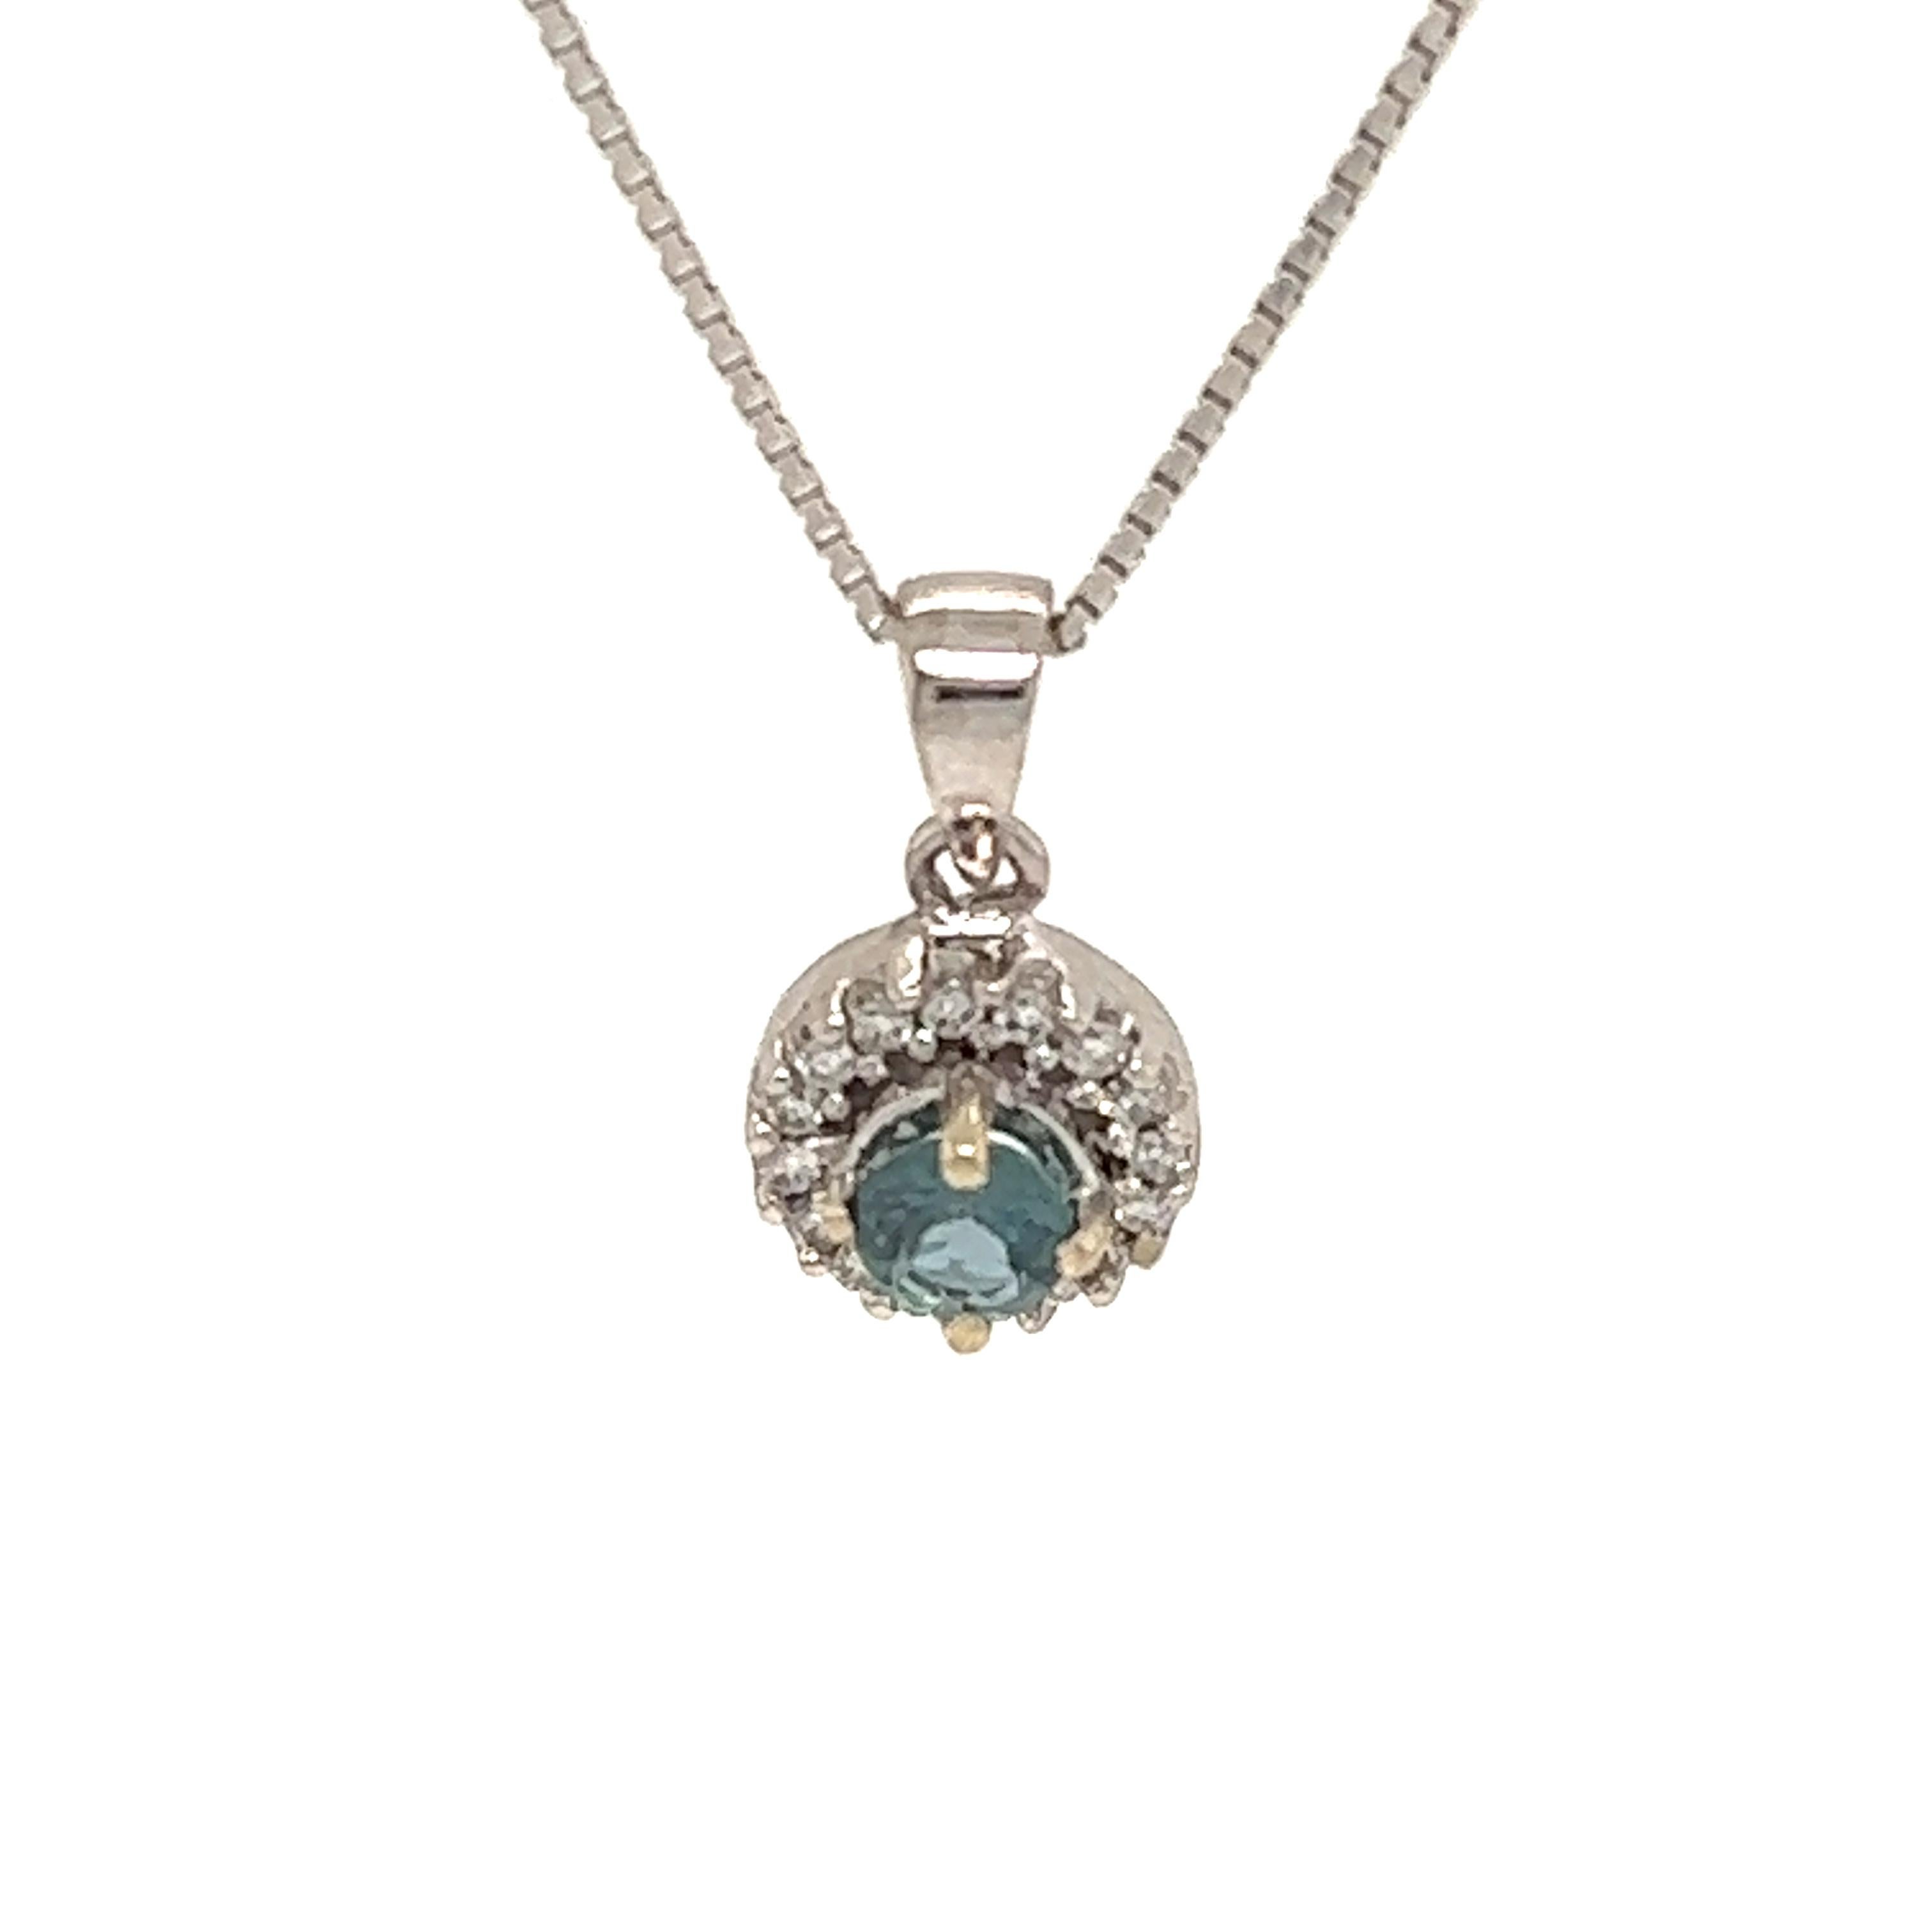 This is a gorgeous Alexandrite and white diamond pendant stamped in solid 18K white gold. The striking round brilliant  Alexandrite have an excellent green color and is surrounded by a halo of round-cut white diamonds. The pendant is stamped 18K and